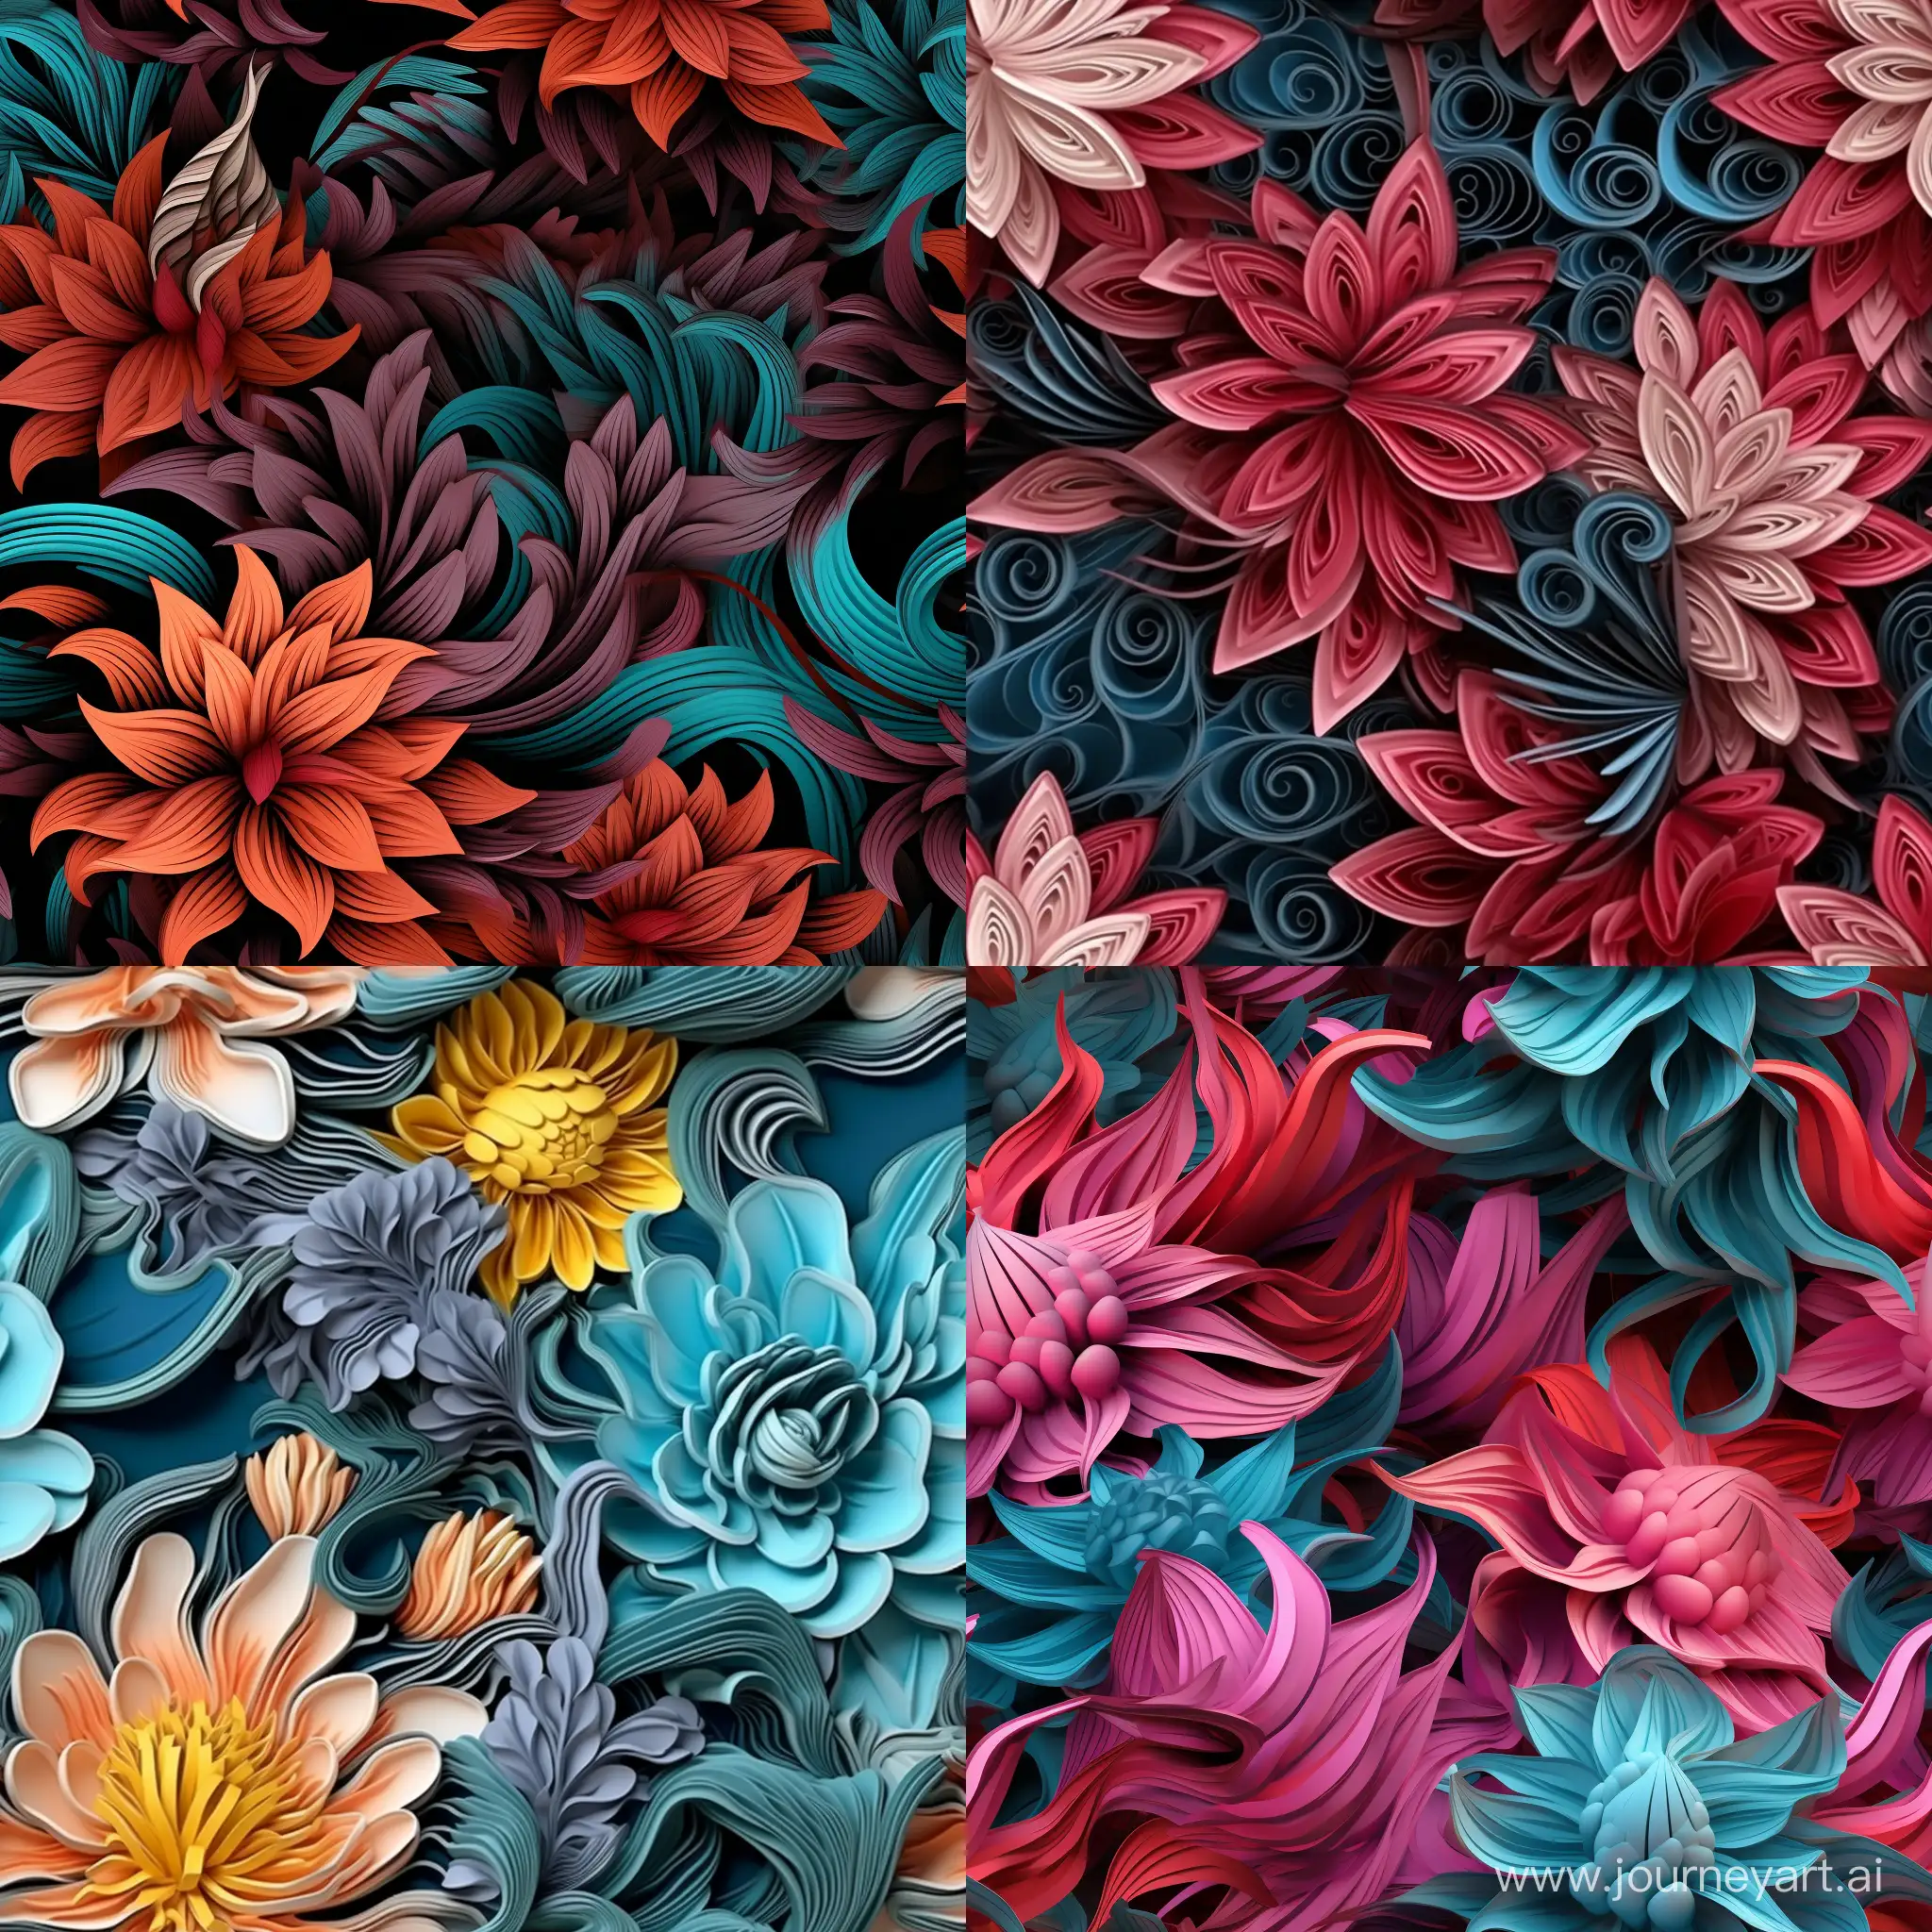 Energetic-3D-Floral-Surrealism-Vibrant-Dreamy-Patterns-in-Fabric-Art